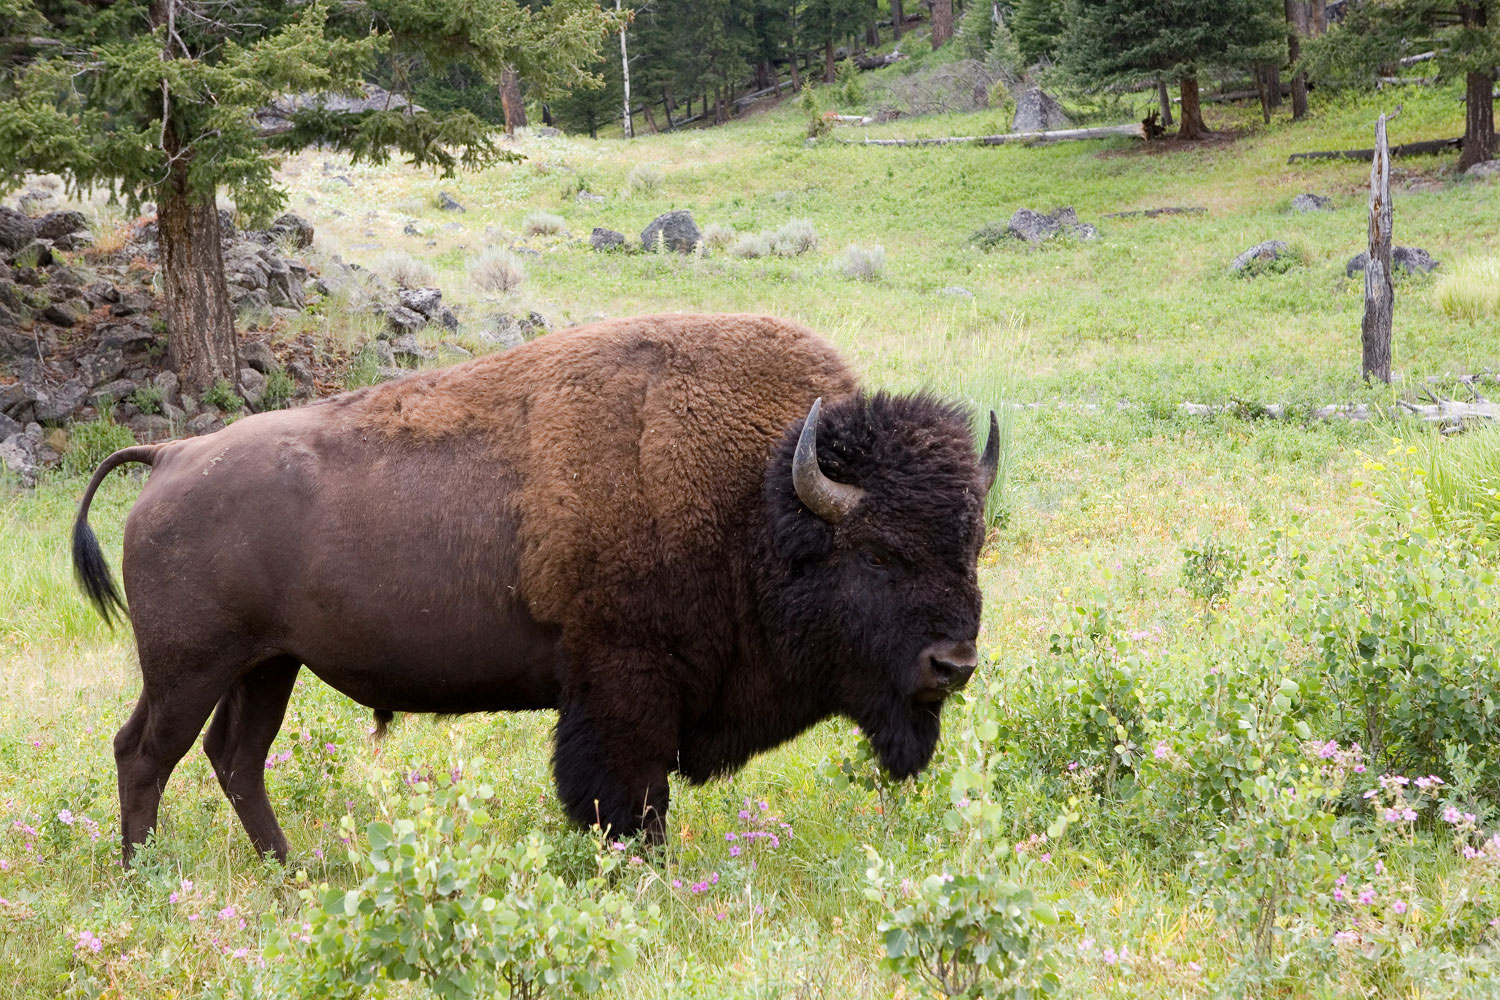 Often solitary in summer, this senior bison had shed half his winter coat.